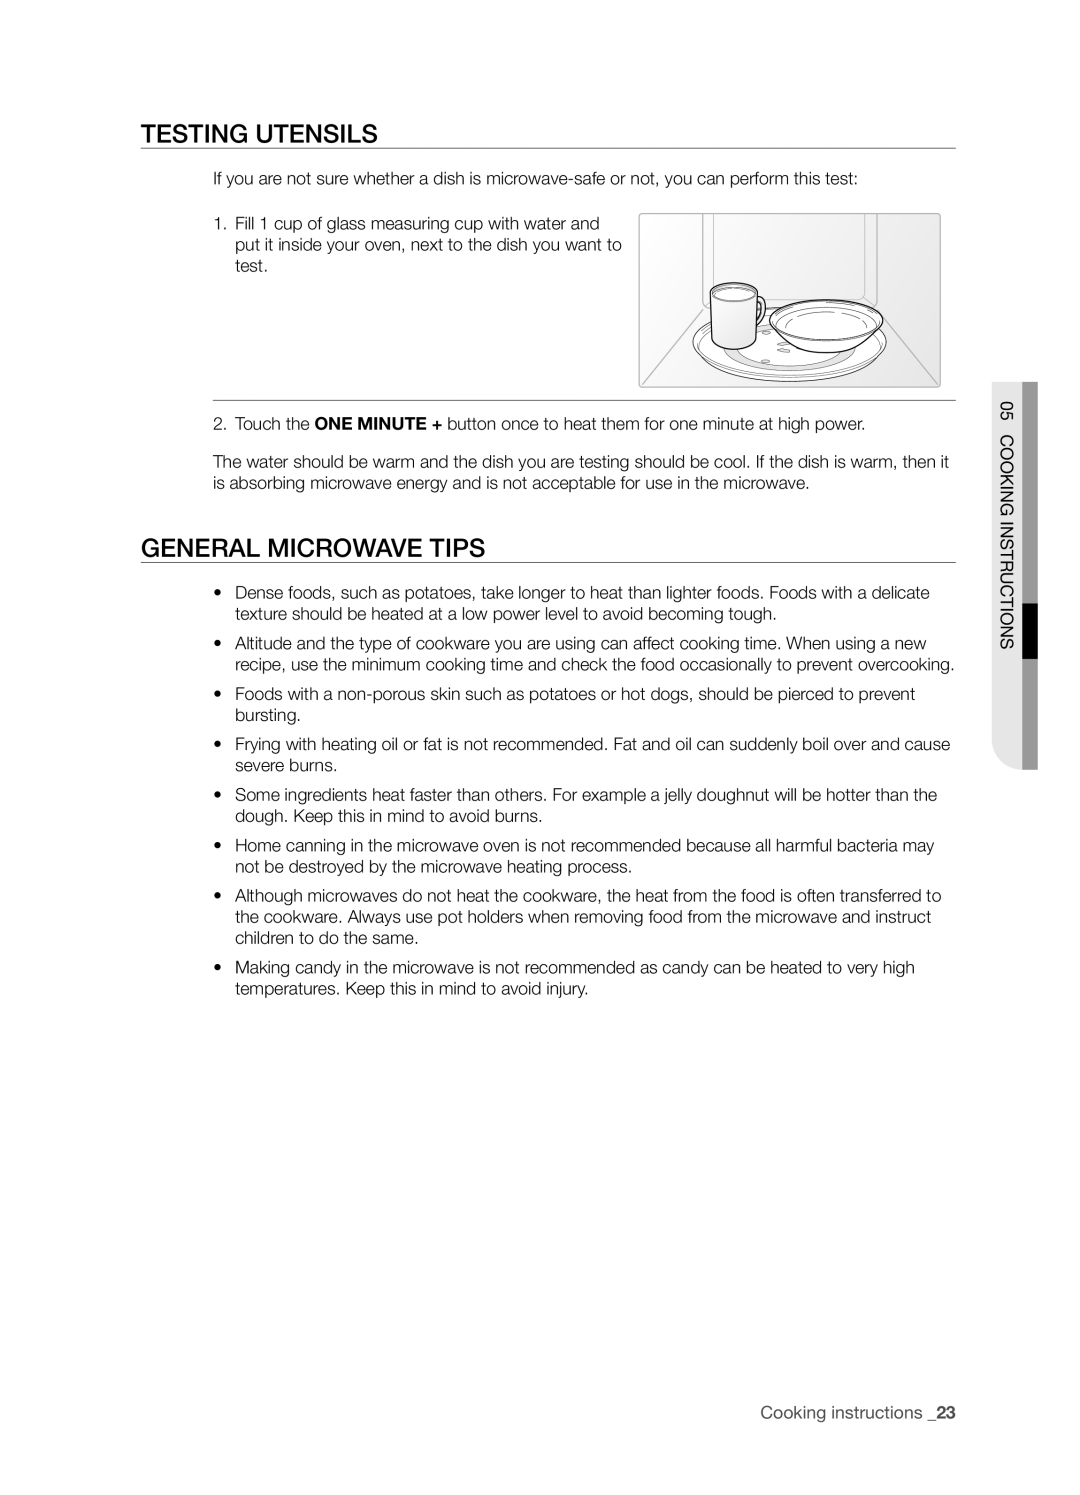 Samsung SMH5165 user manual Testing utensils, General microwave tips, Cooking instructions 